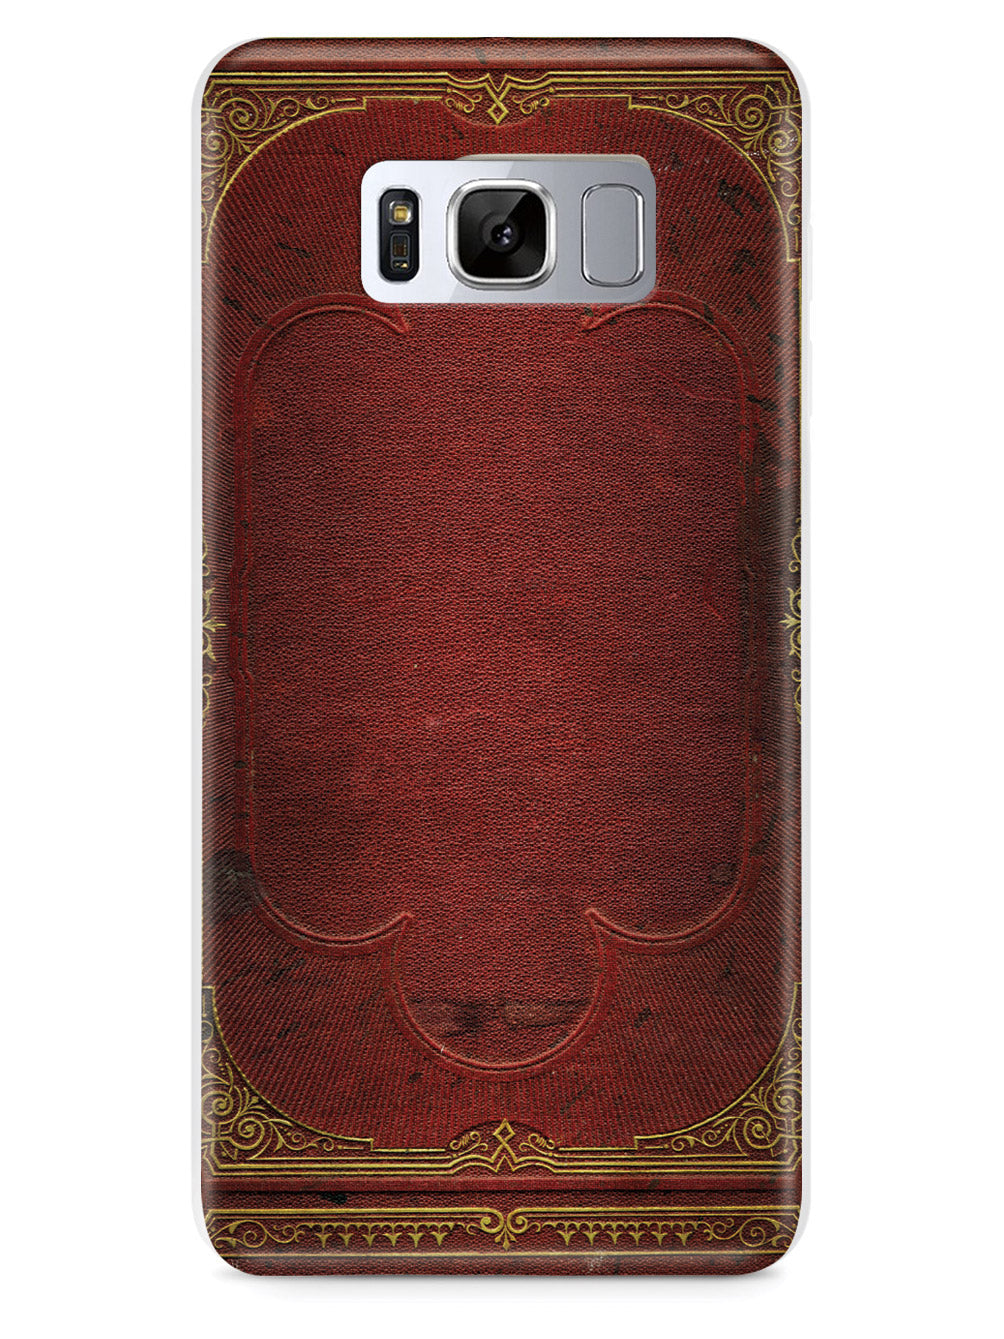 Ancient Book Cover - Red and Gold Case